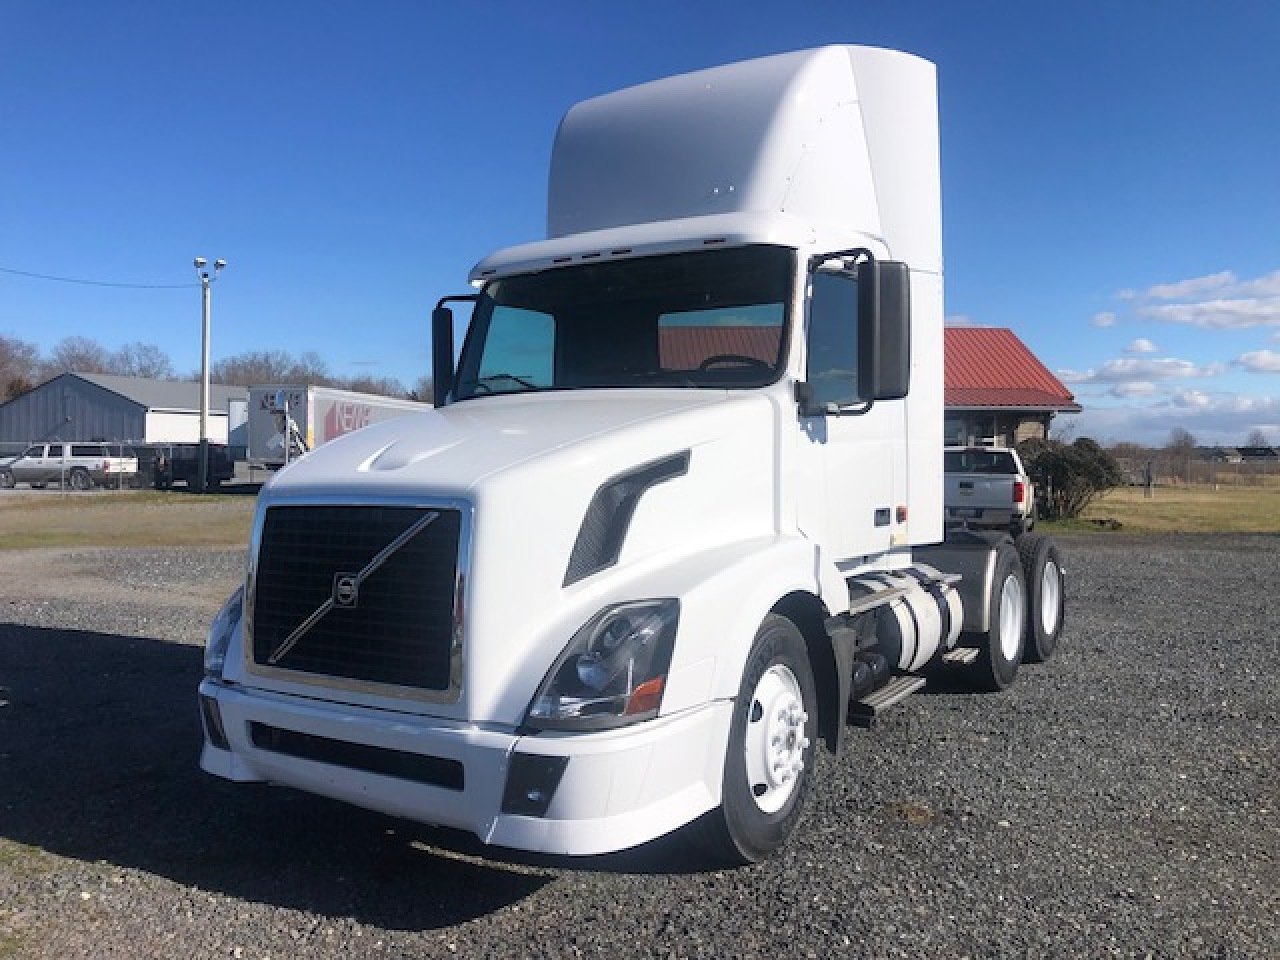 USED 2006 VOLVO VNL64T300 TANDEM AXLE DAYCAB TRUCK #1370